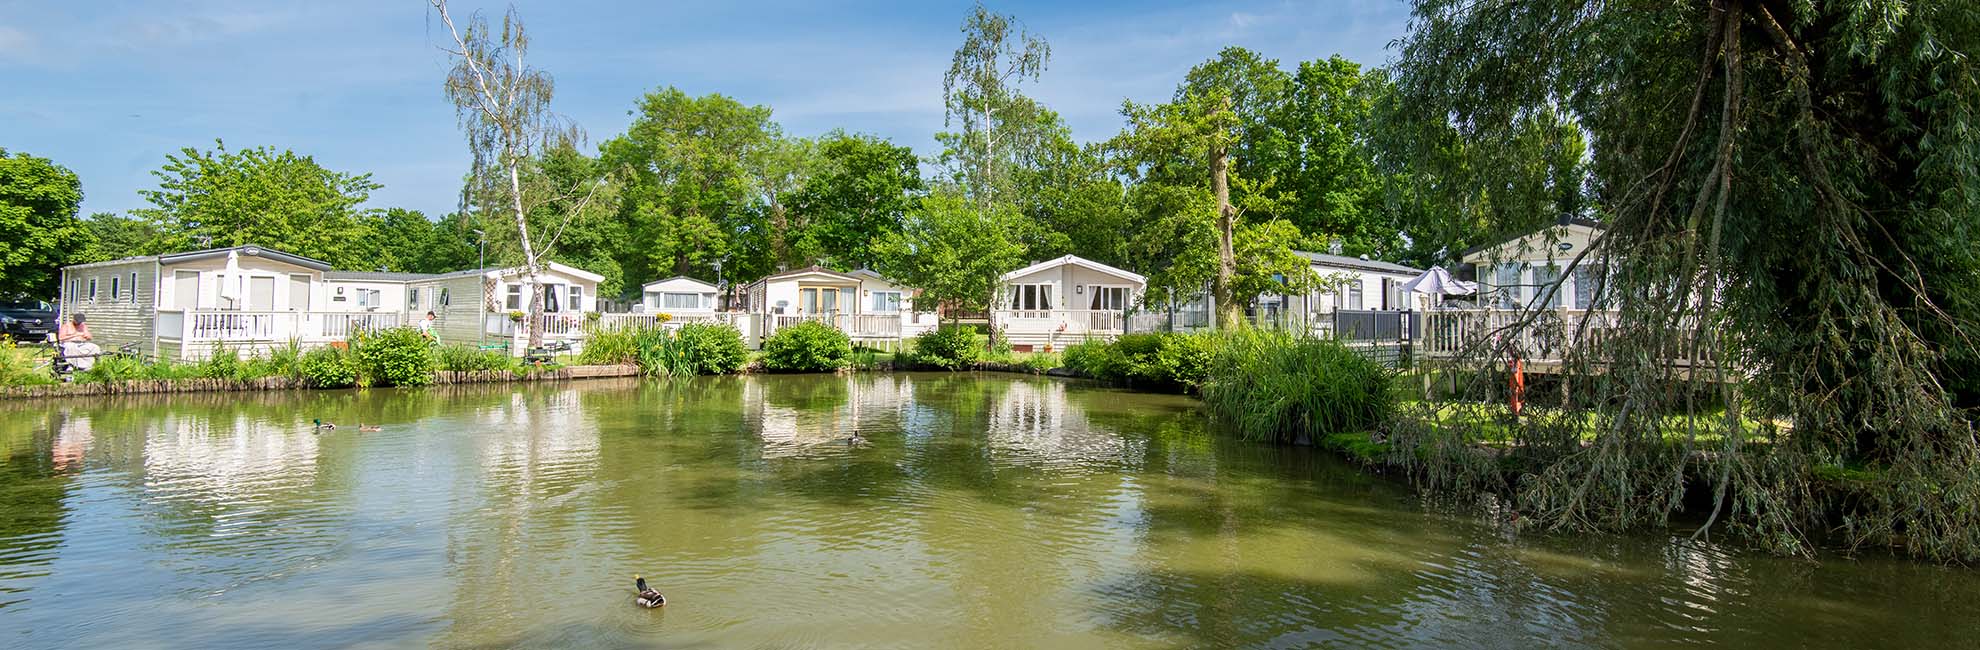 The accommodation by the fishing lake at Weeley Bridge Holiday Park